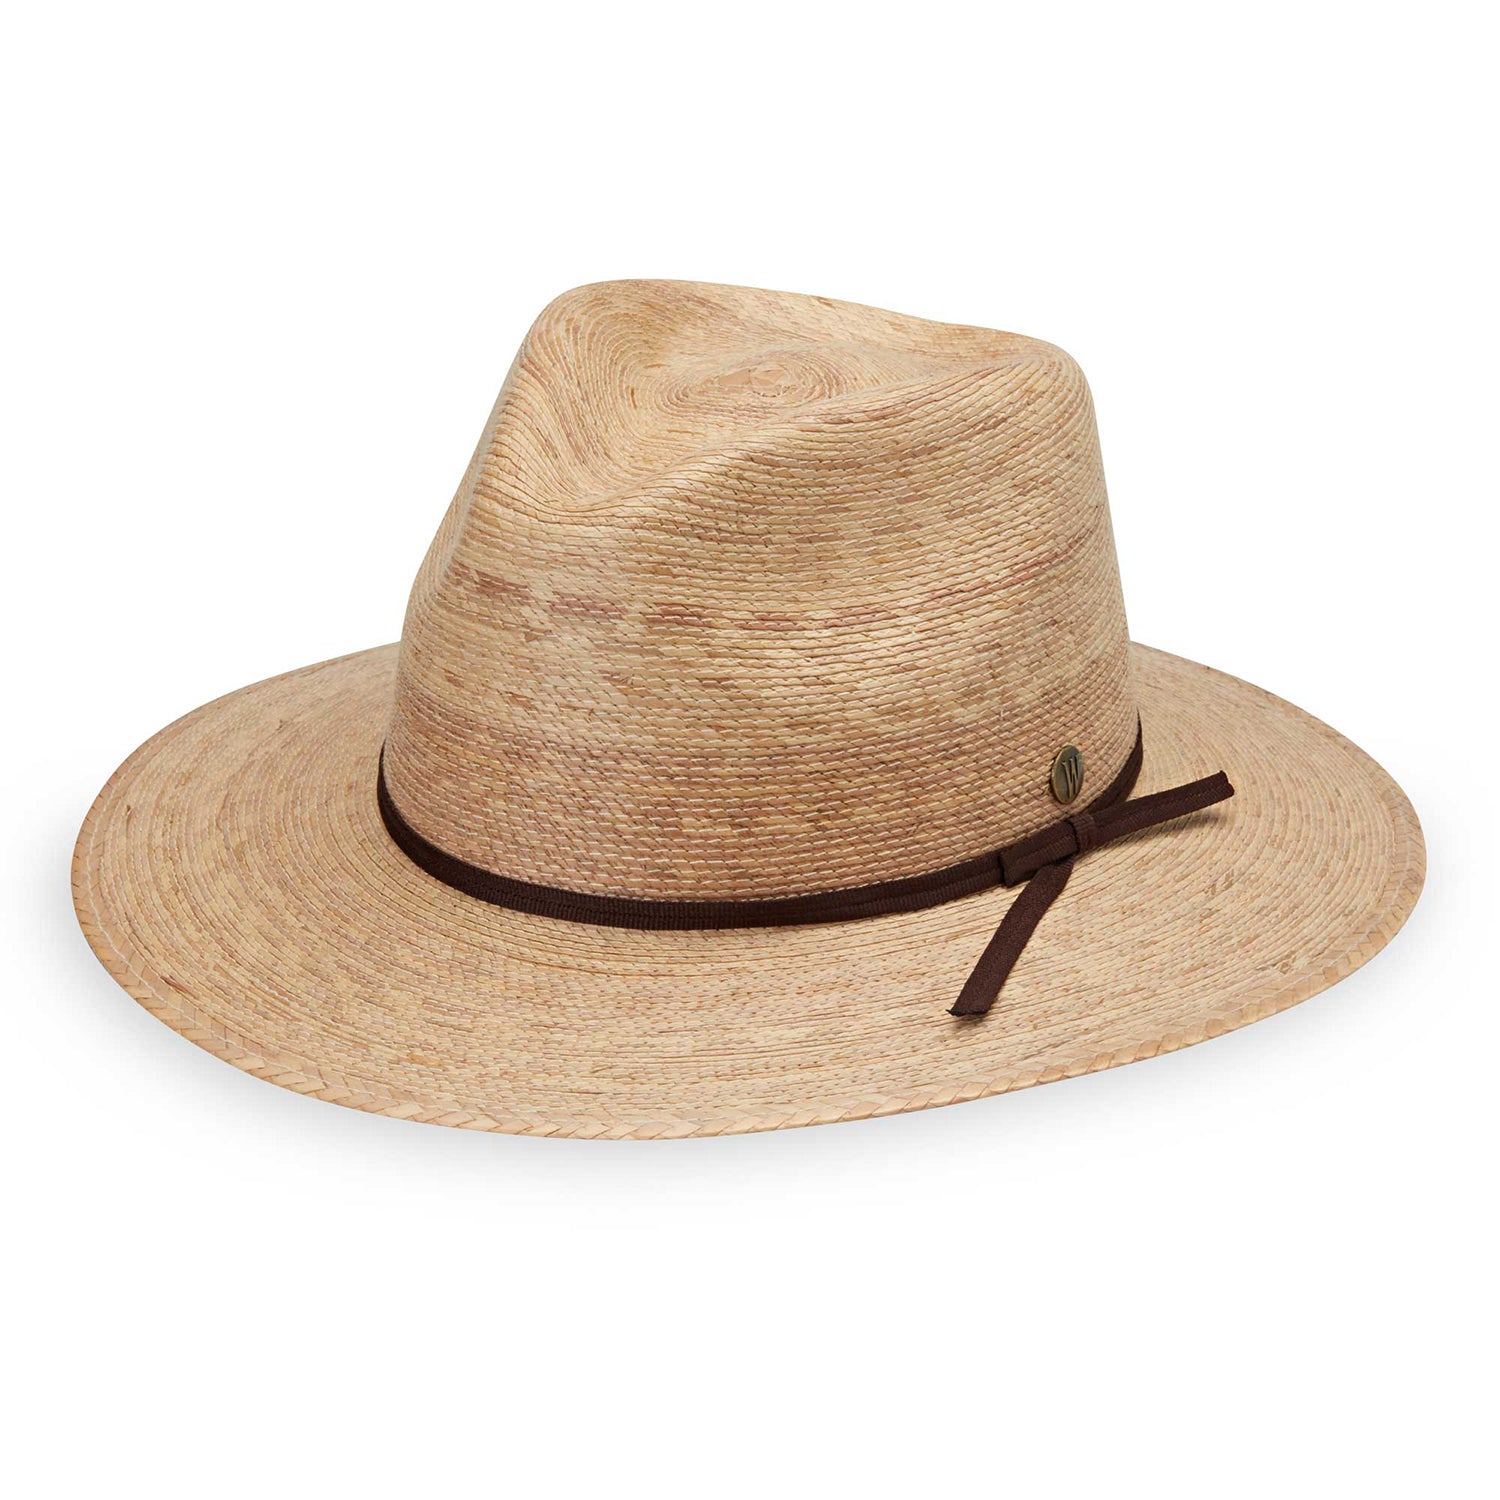 Featuring Unisex Marina artisan sun hat by Wallaroo, featuring a wide brim and a UPF 50+ rating